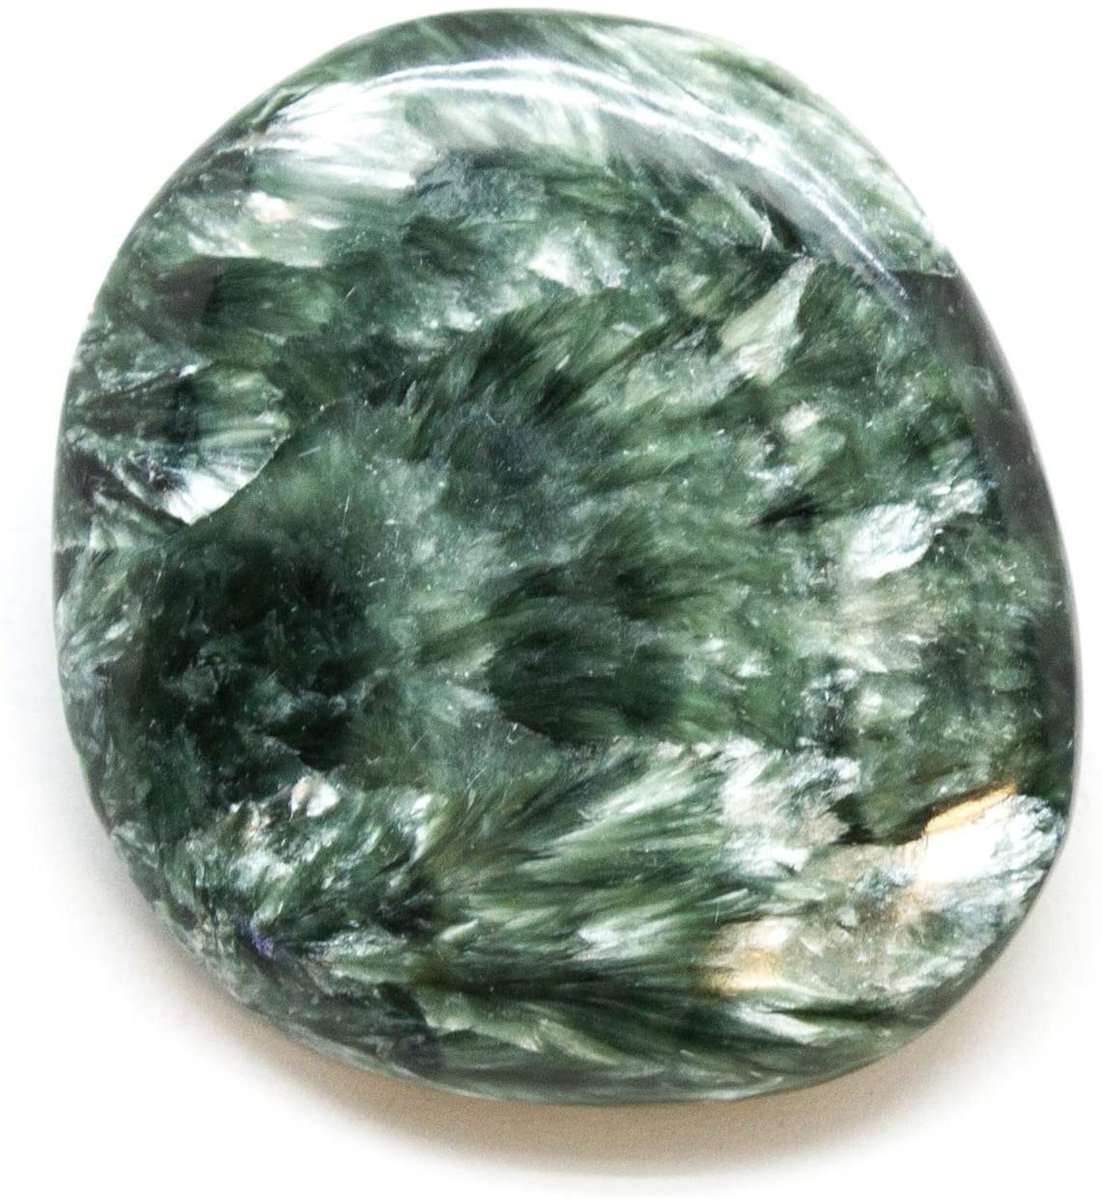 𝓢𝓮𝓻𝓪𝓹𝓱𝓲𝓷𝓲𝓽𝓮It is a stone of spiritual enlightenment. It is said to be able to connect and communicate with higher energies. It is excellent for accessing self-healing. Seraphinite promotes living from the heart.